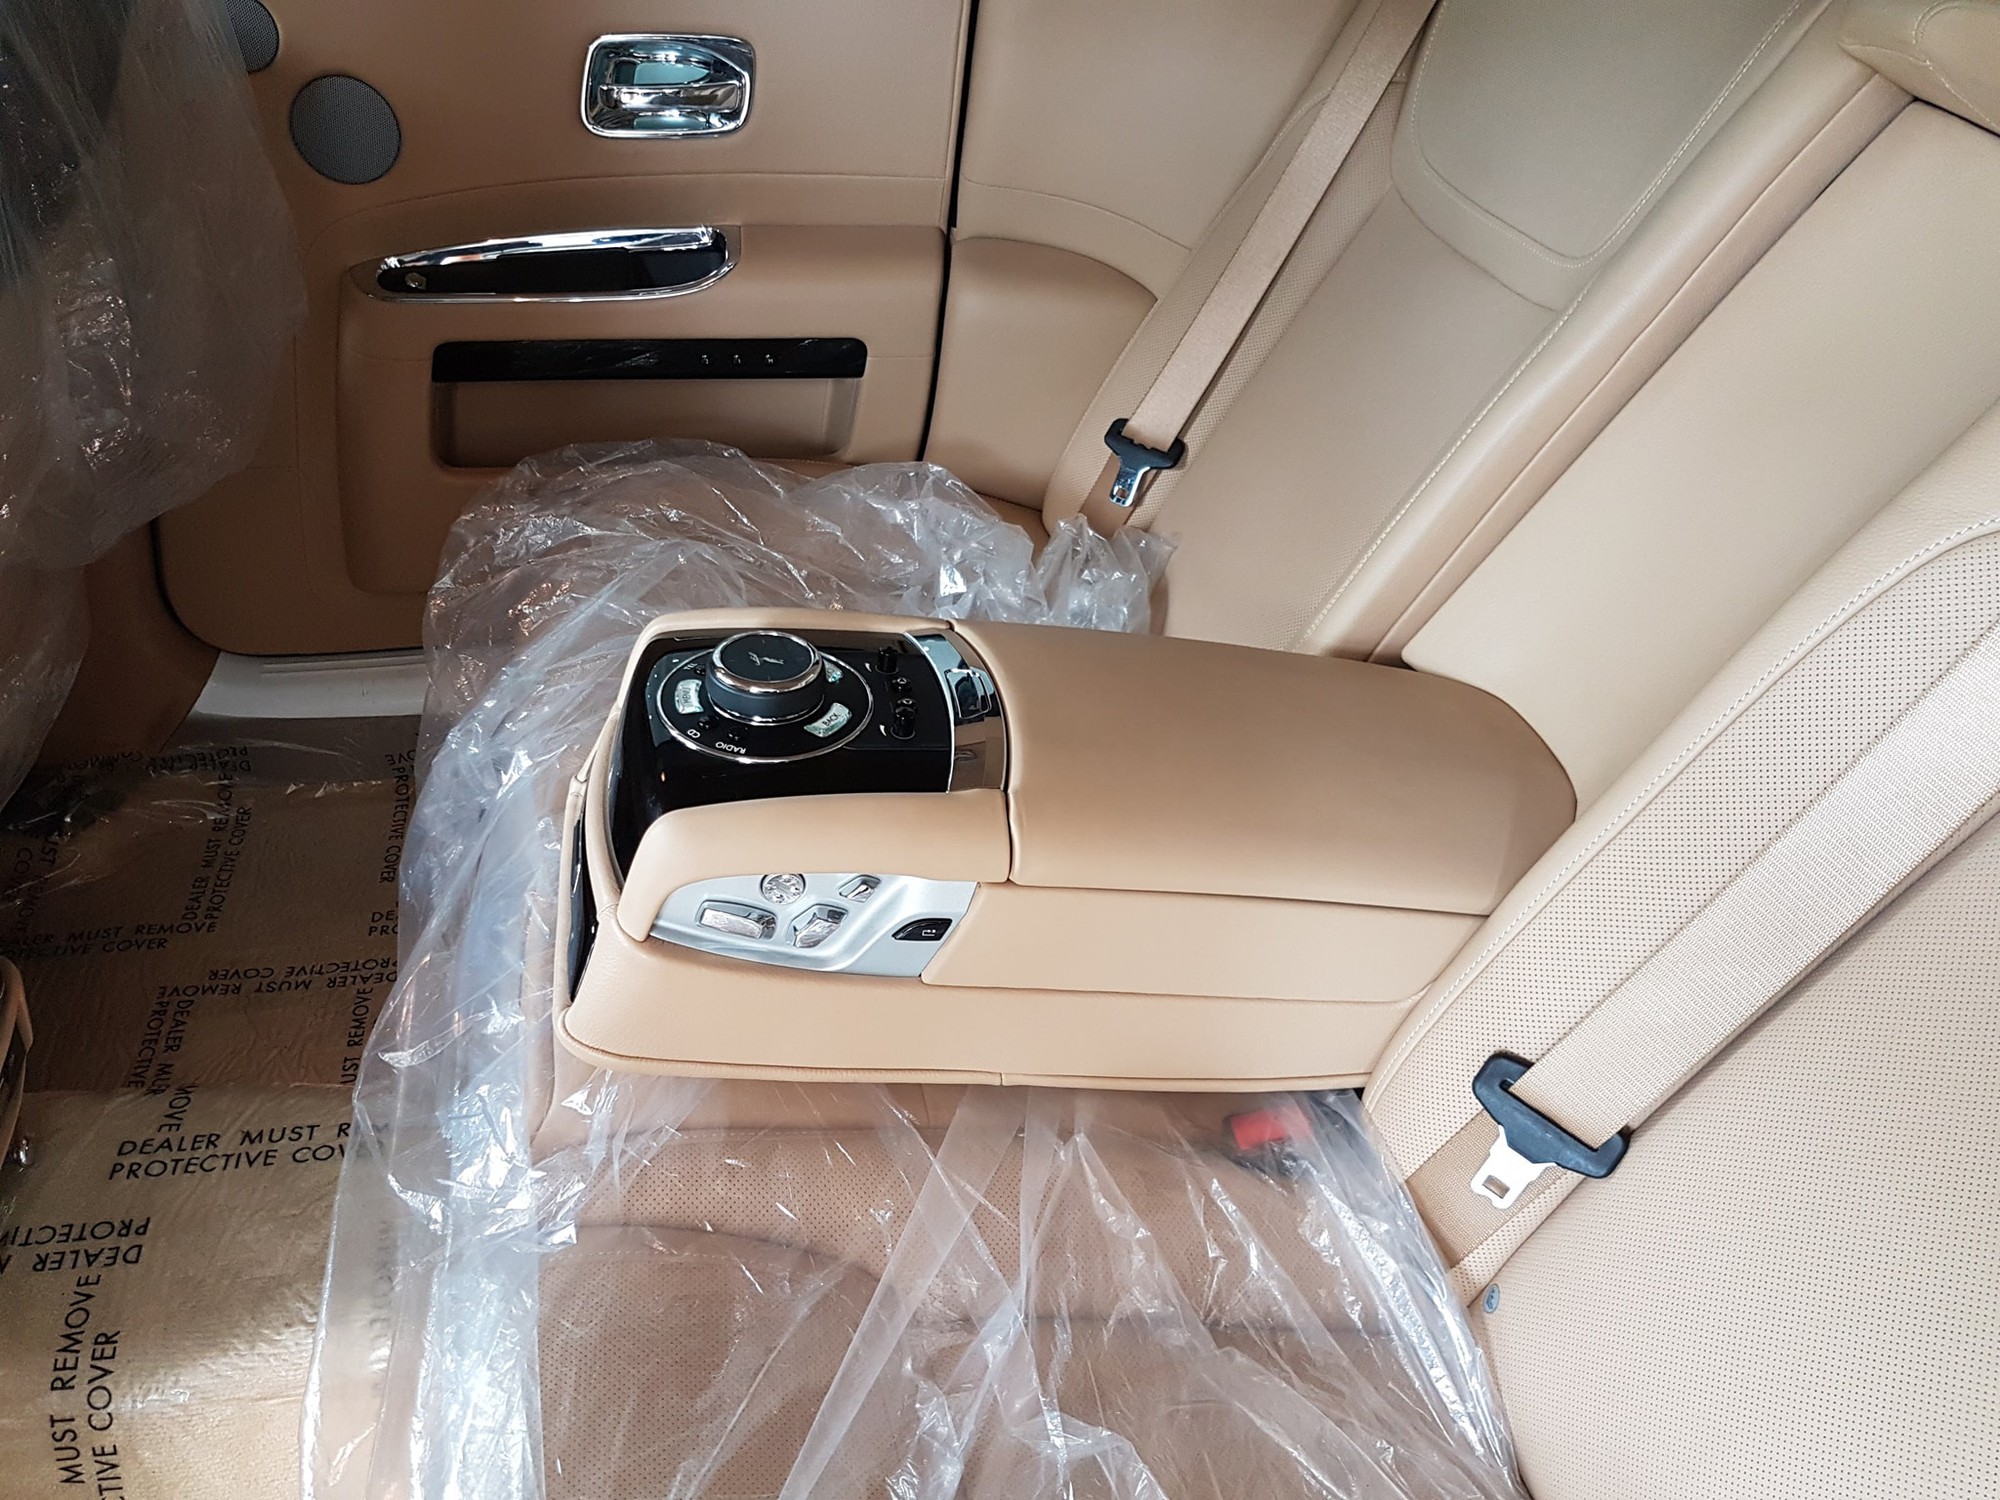 Rolls Royce full interior change front the old full beige brown interior to  the luxuries white and black genuine leather with black  Instagram